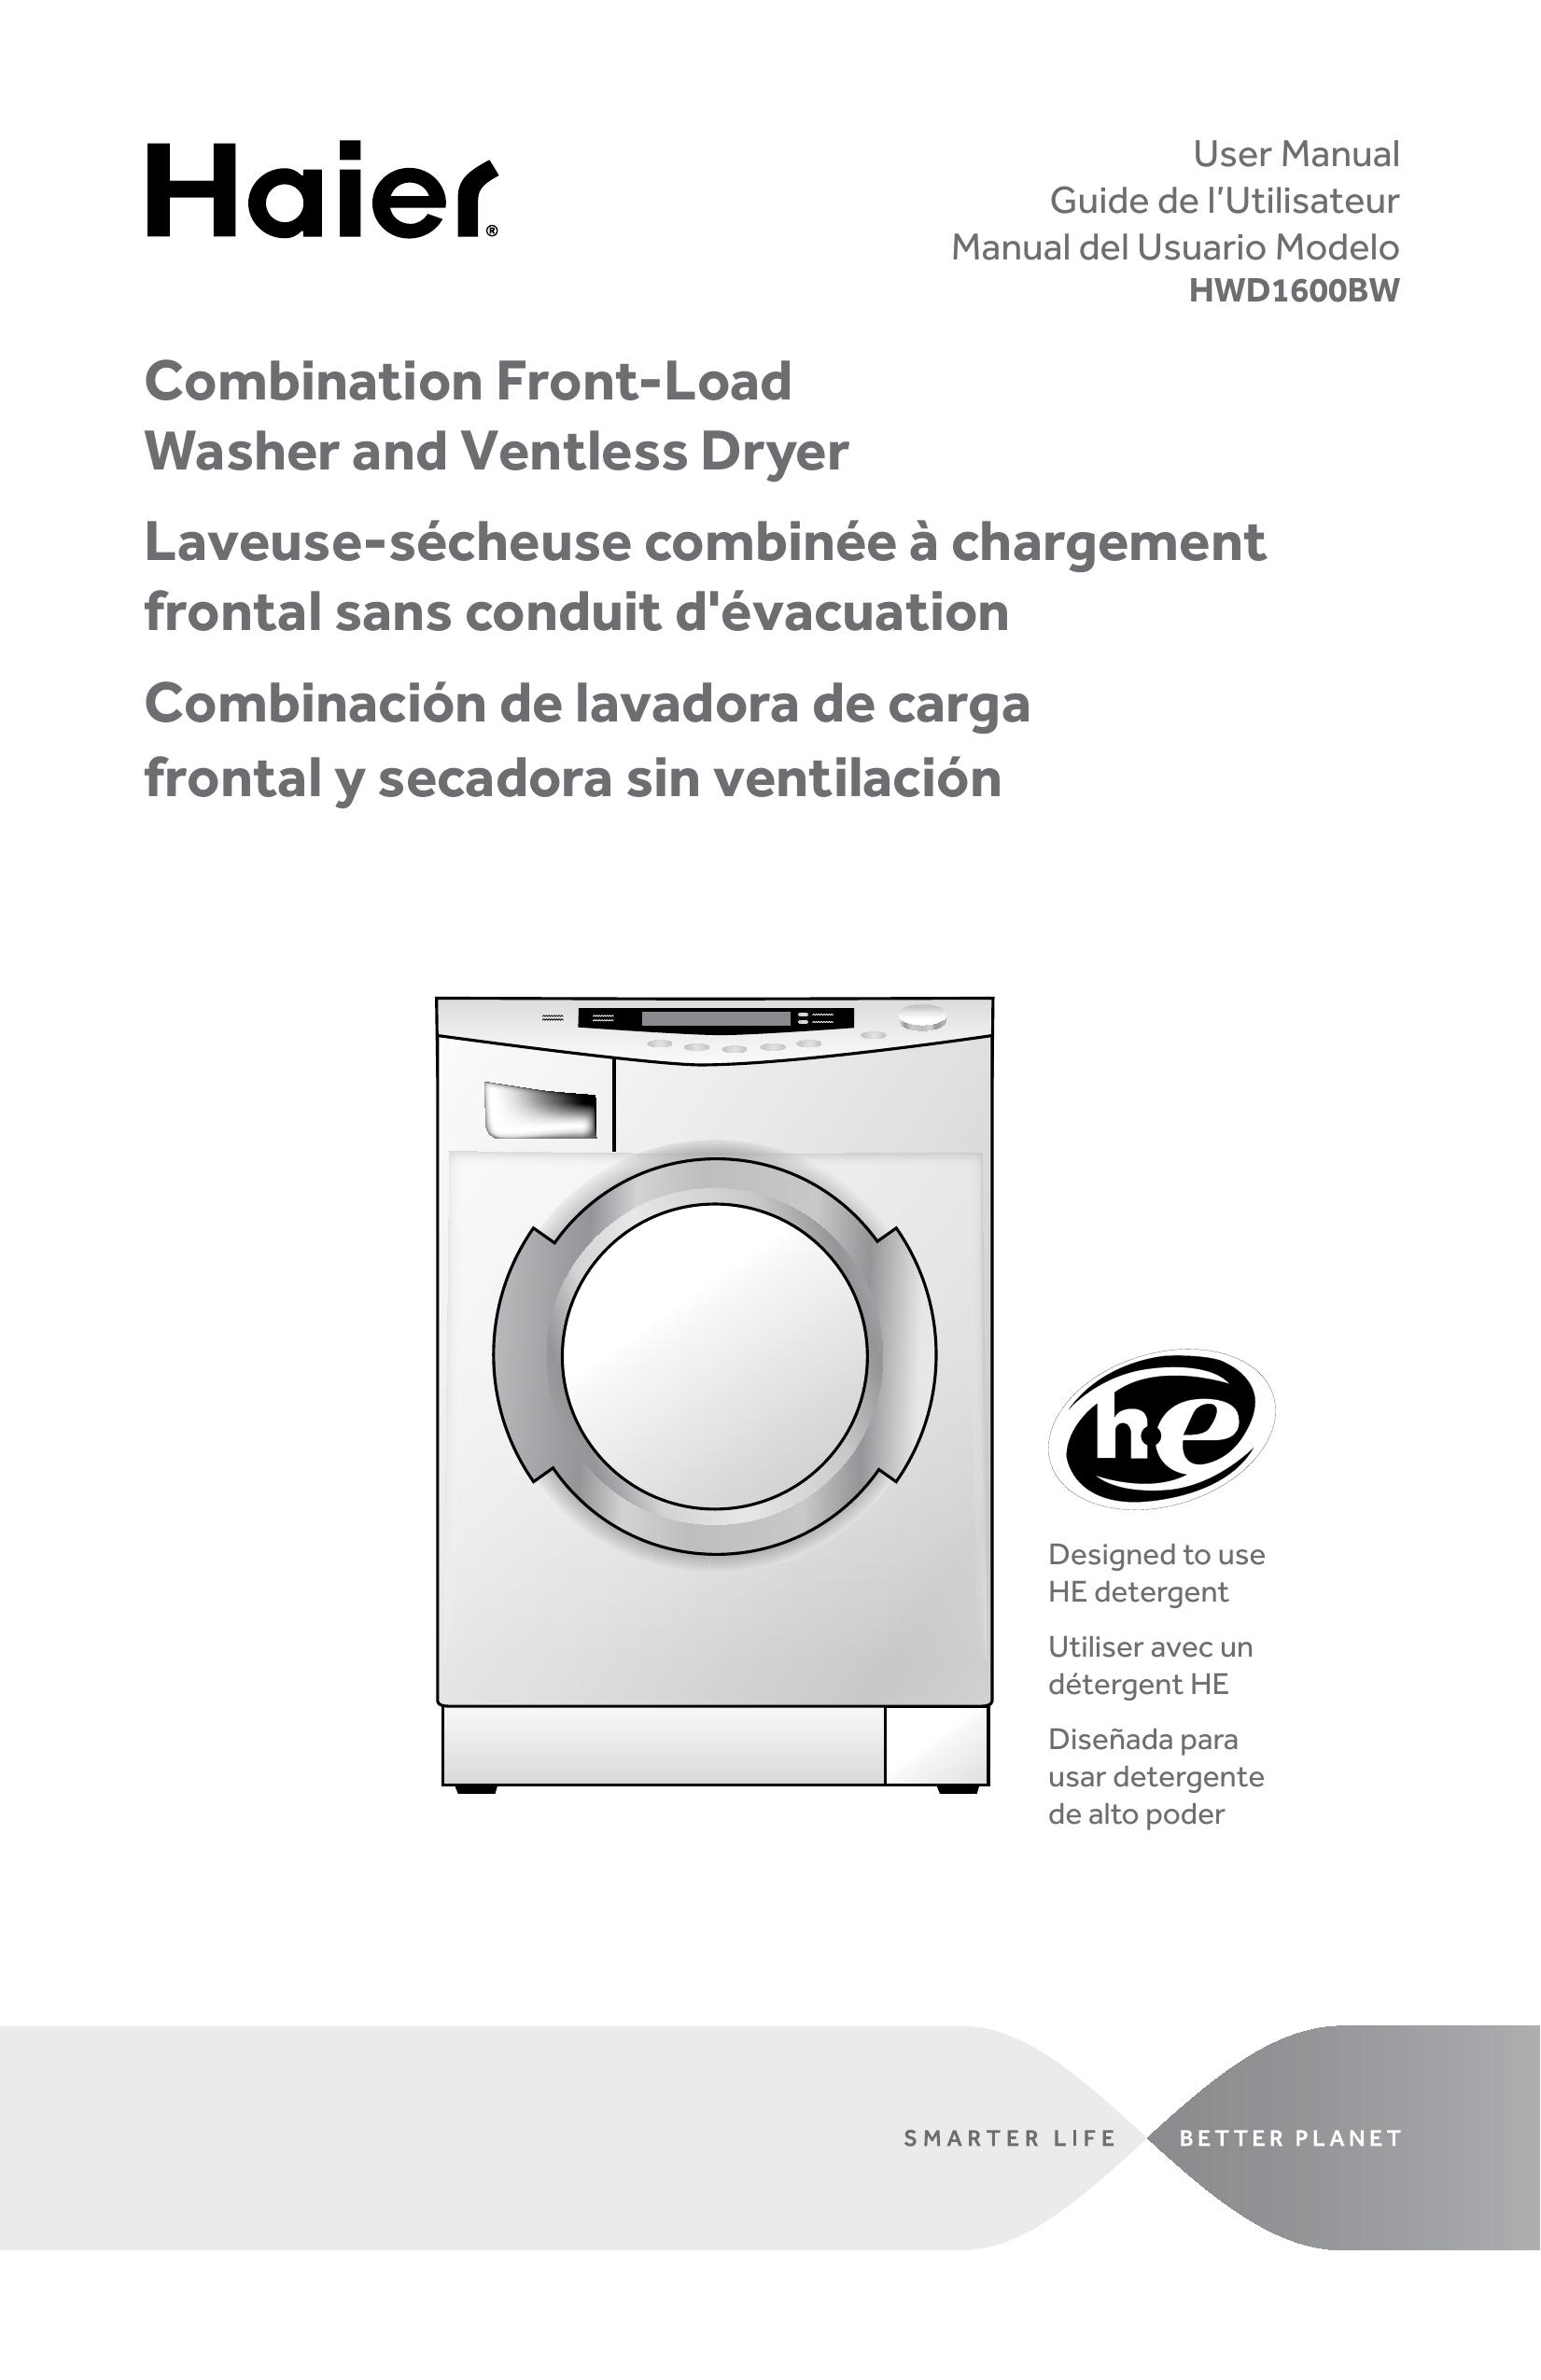 Haier HWD1600BW Clothes Dryer User Manual